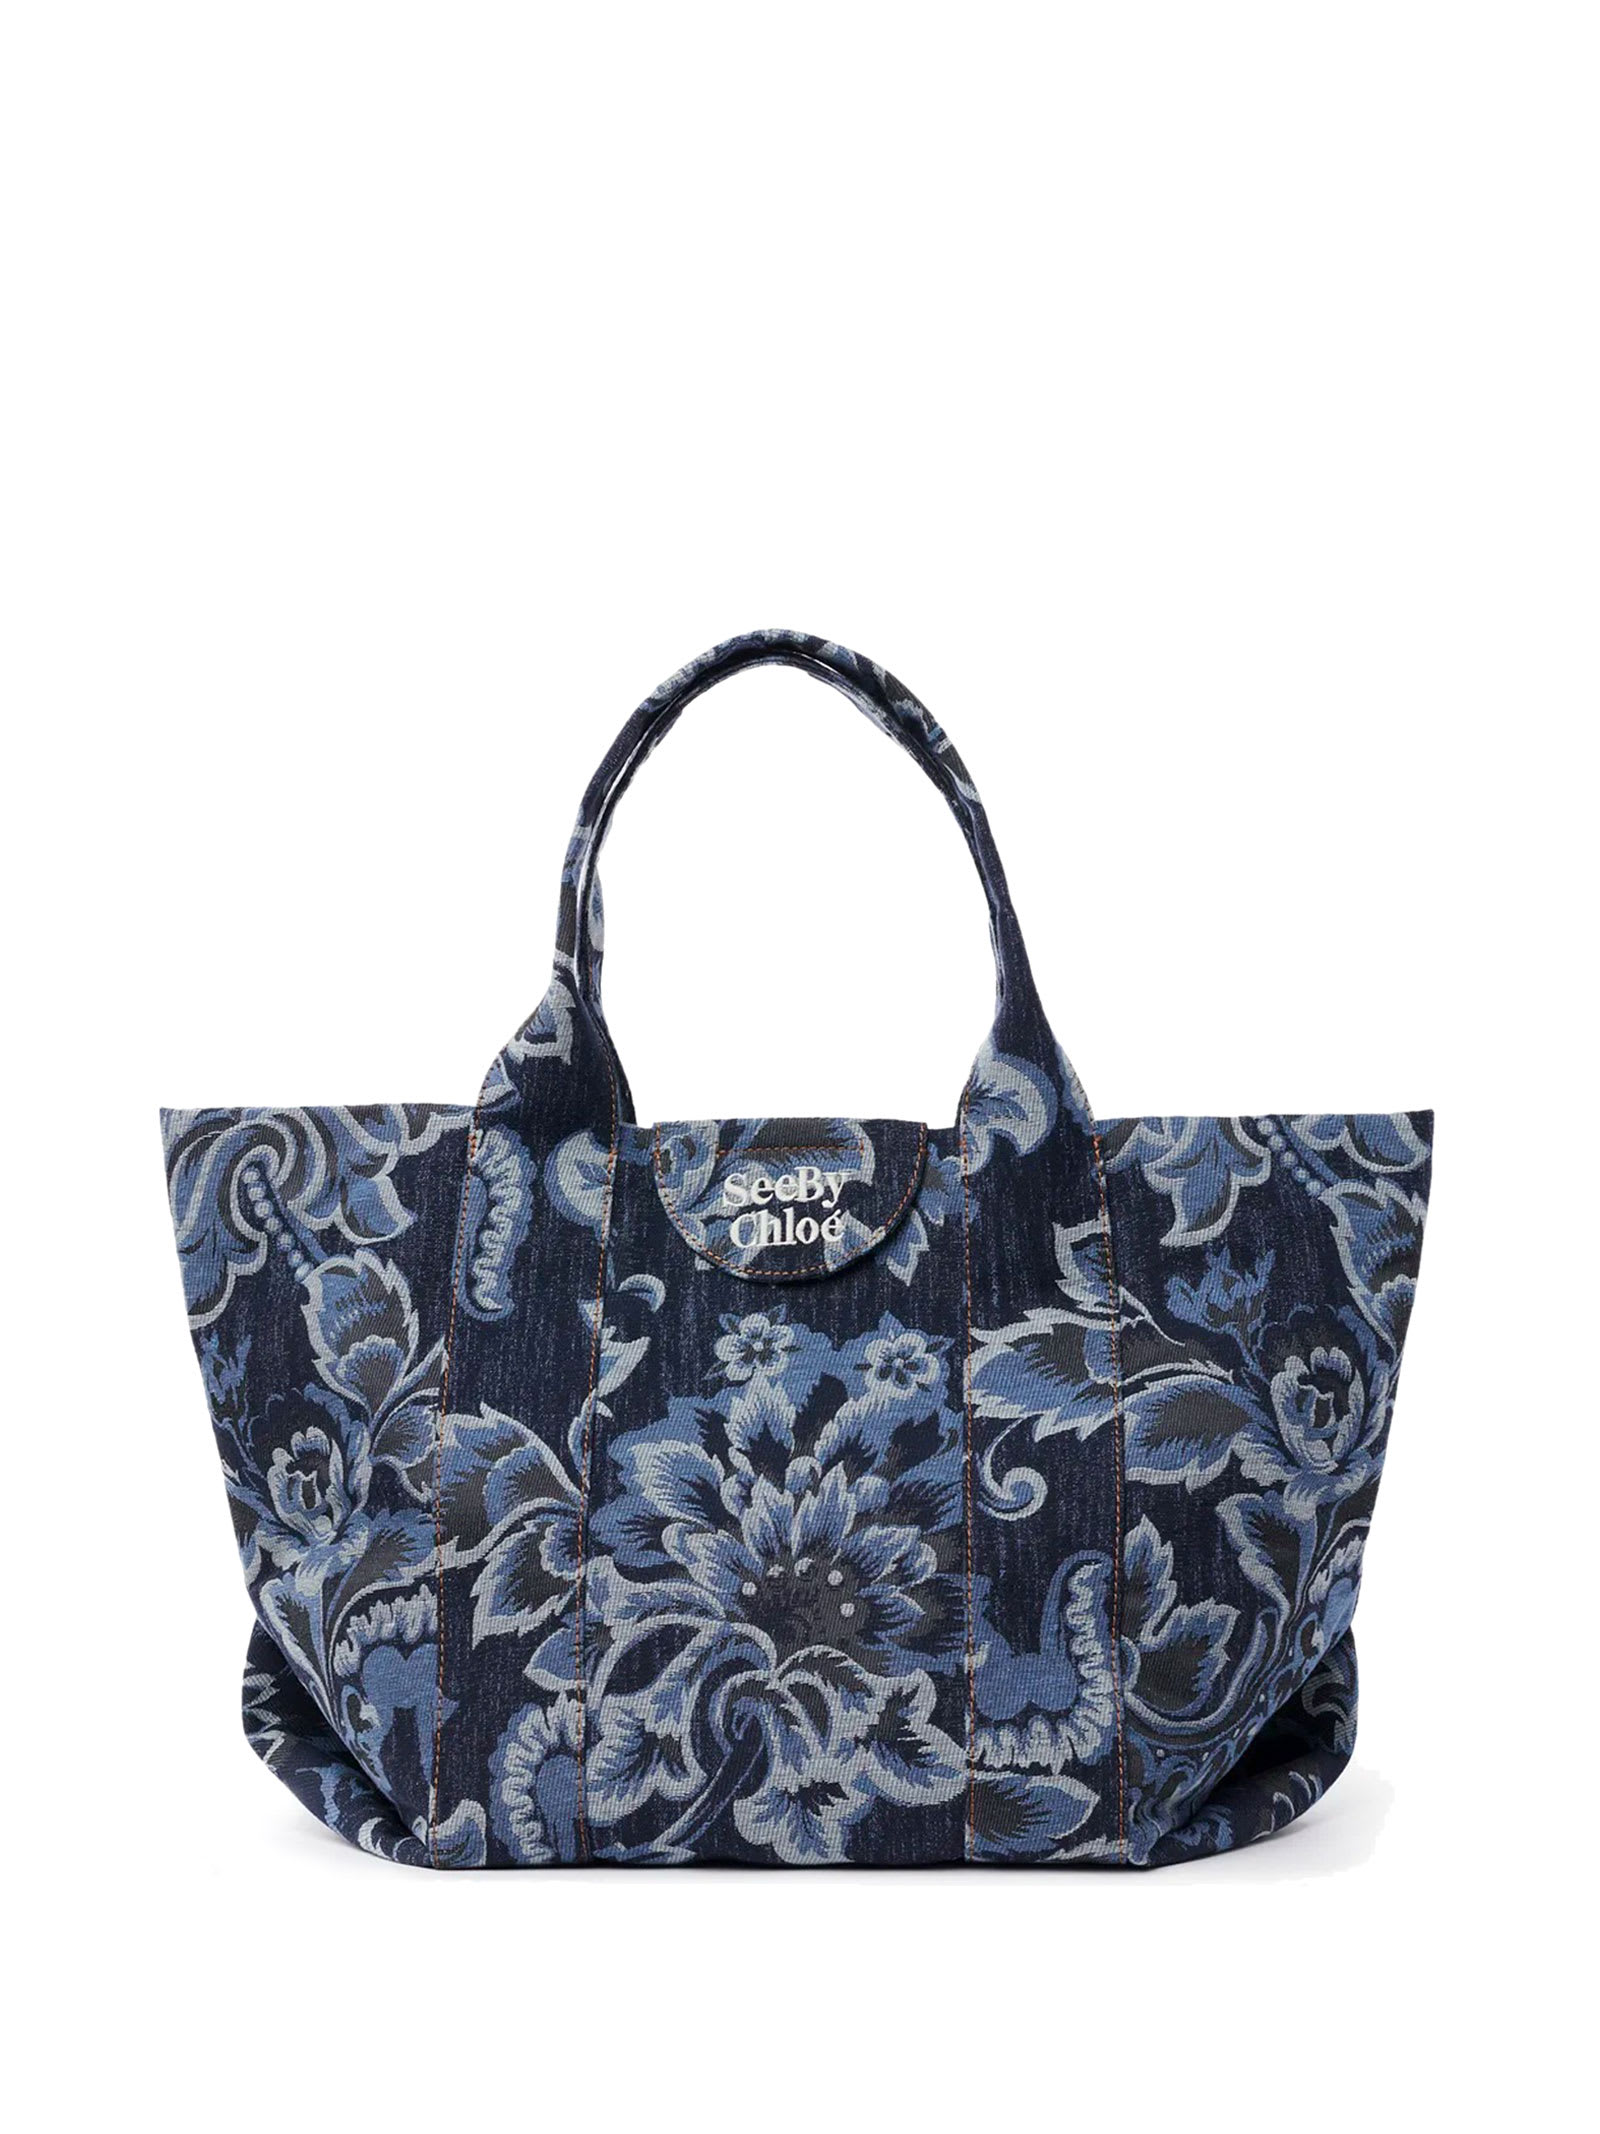 SEE BY CHLOÉ SHOPPING BAG WITH FLORAL PATTERN